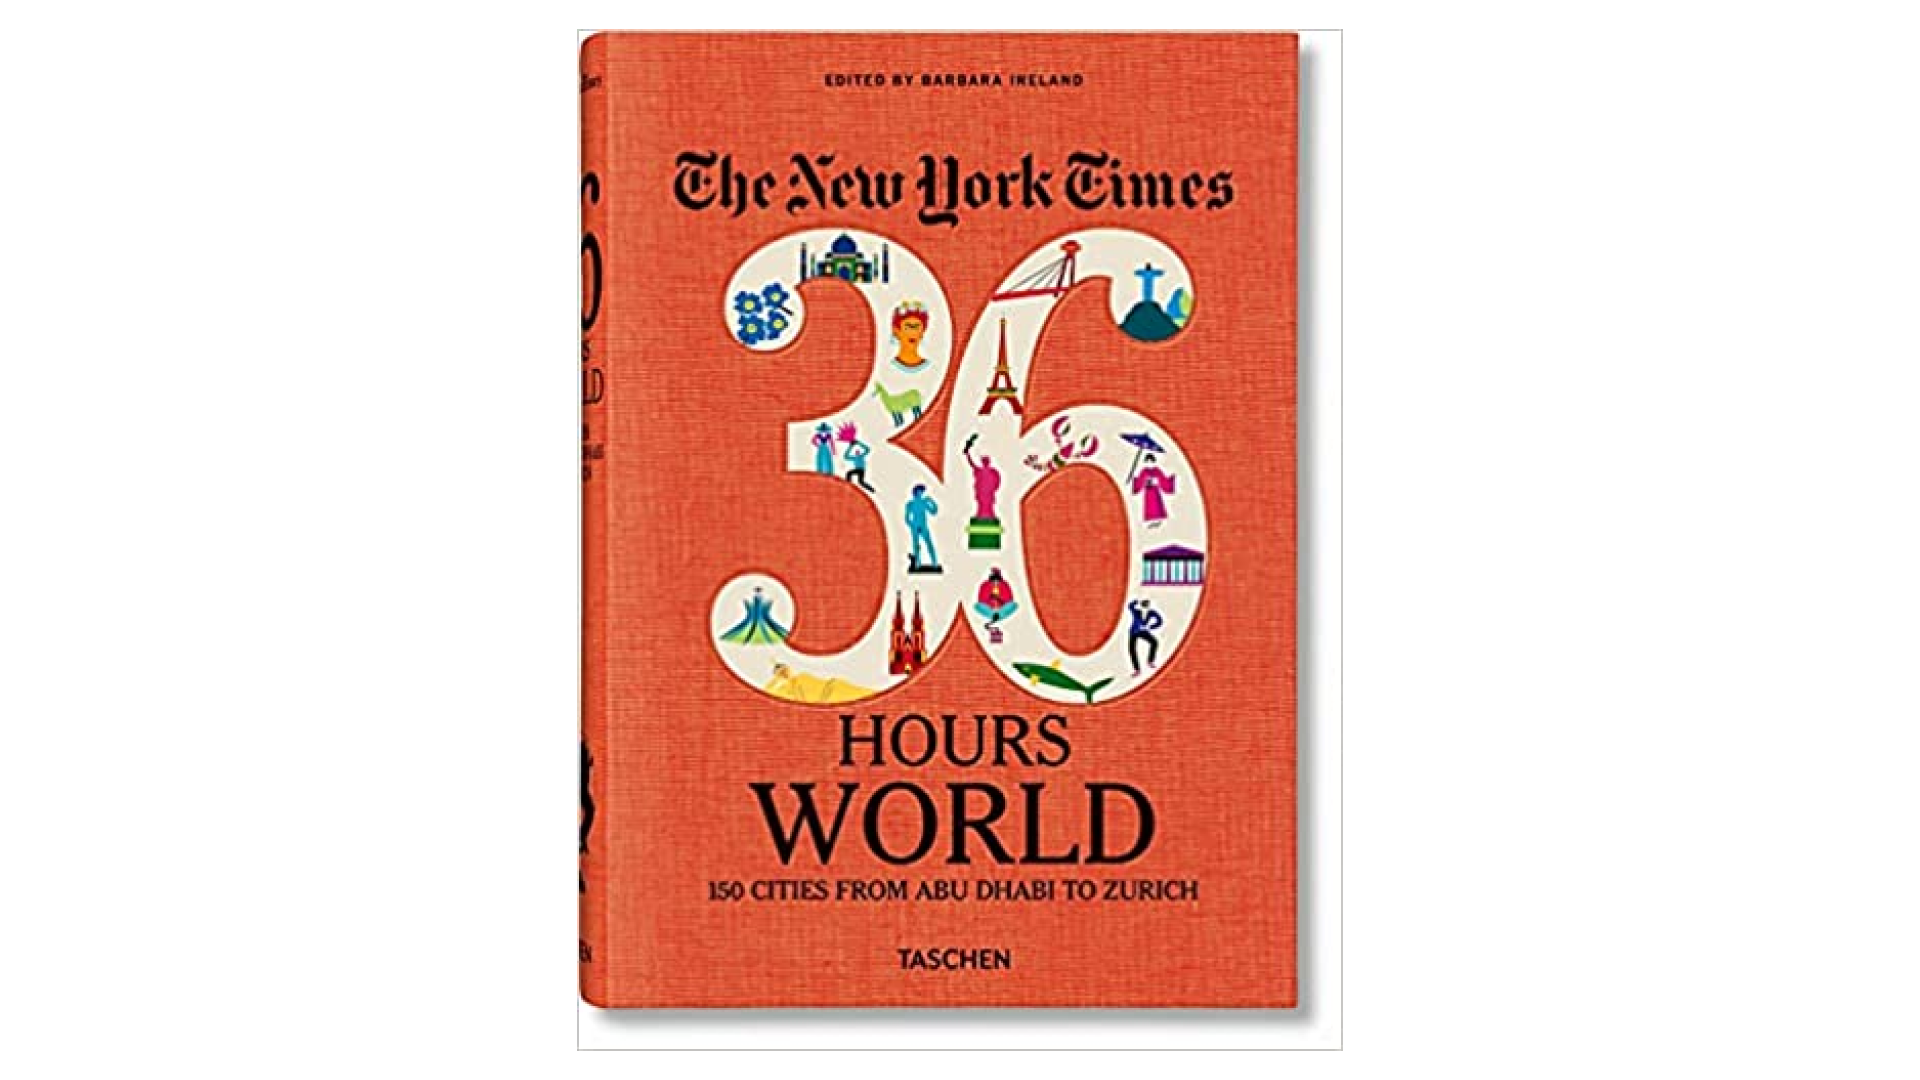 36 Hours travel book